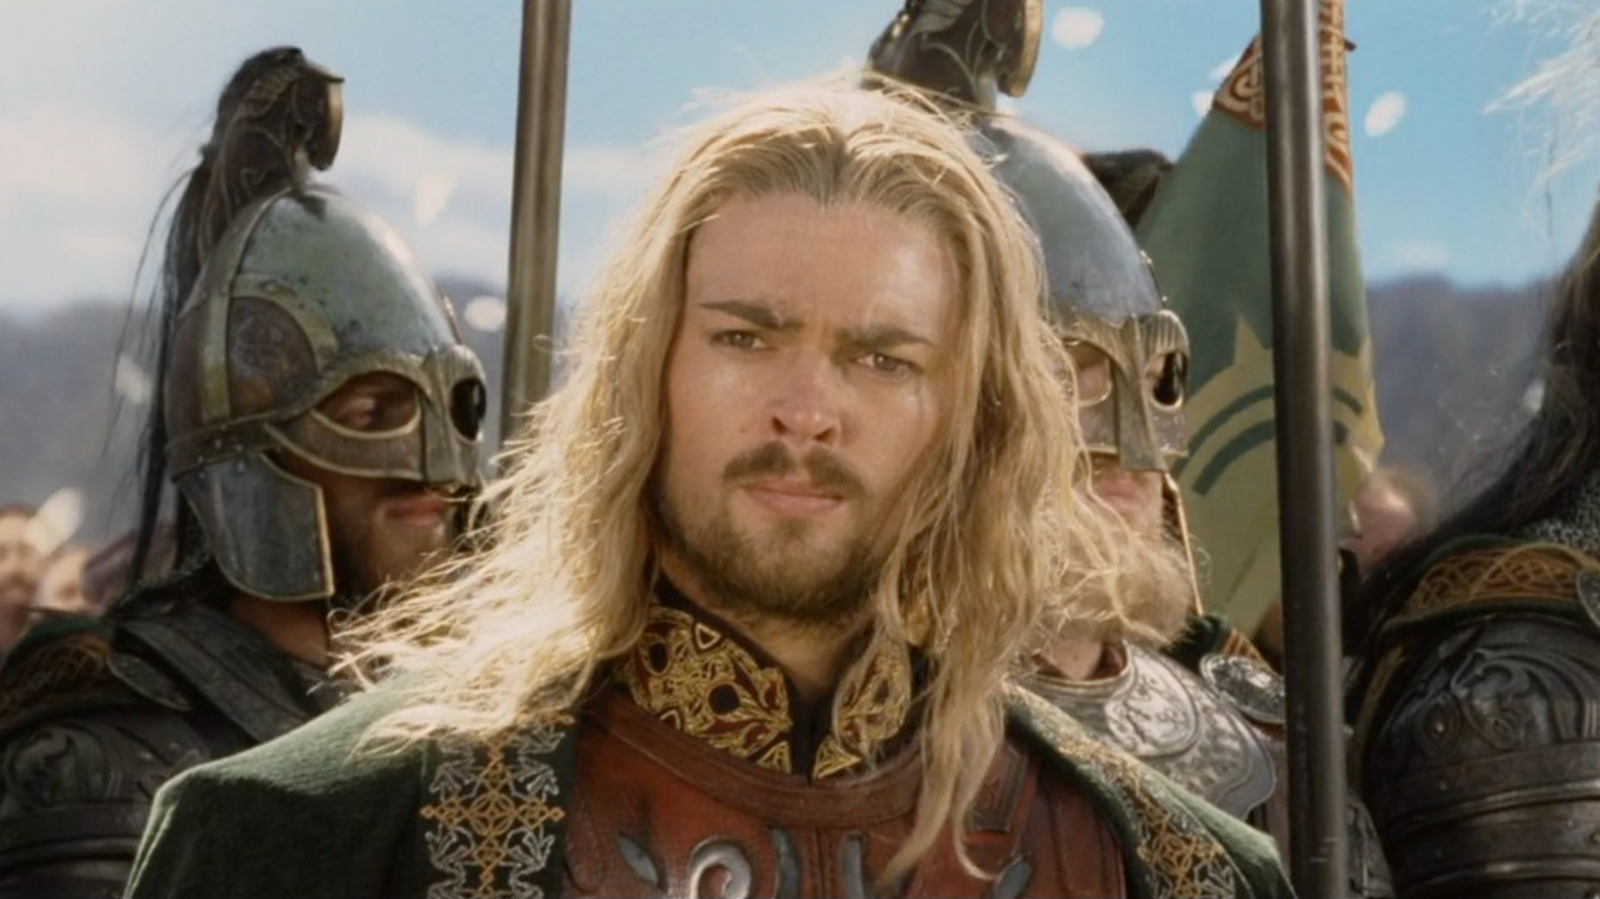 Karl Urban was also cast as Eomer in The Lord of the Rings franchise.